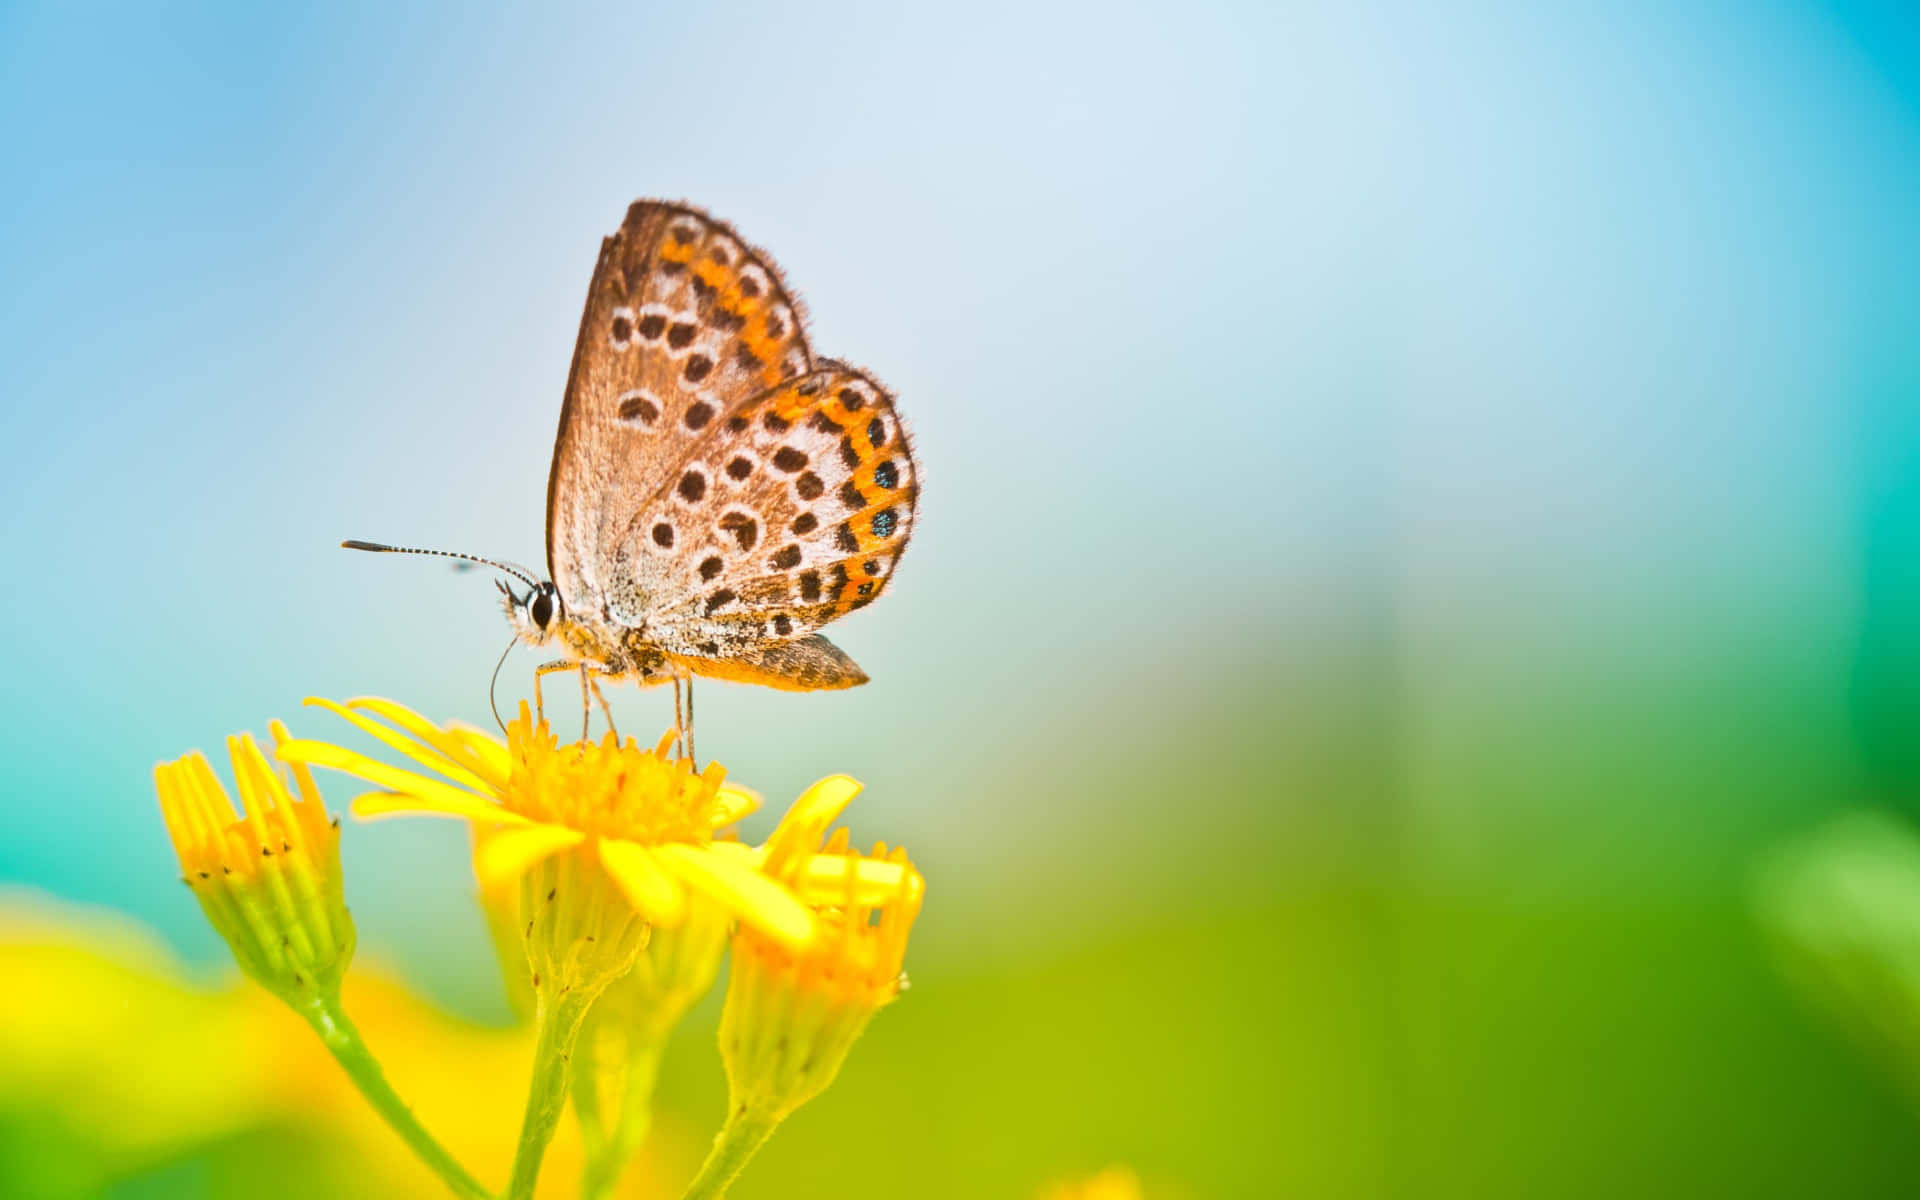 A Butterfly Is Sitting On A Yellow Flower